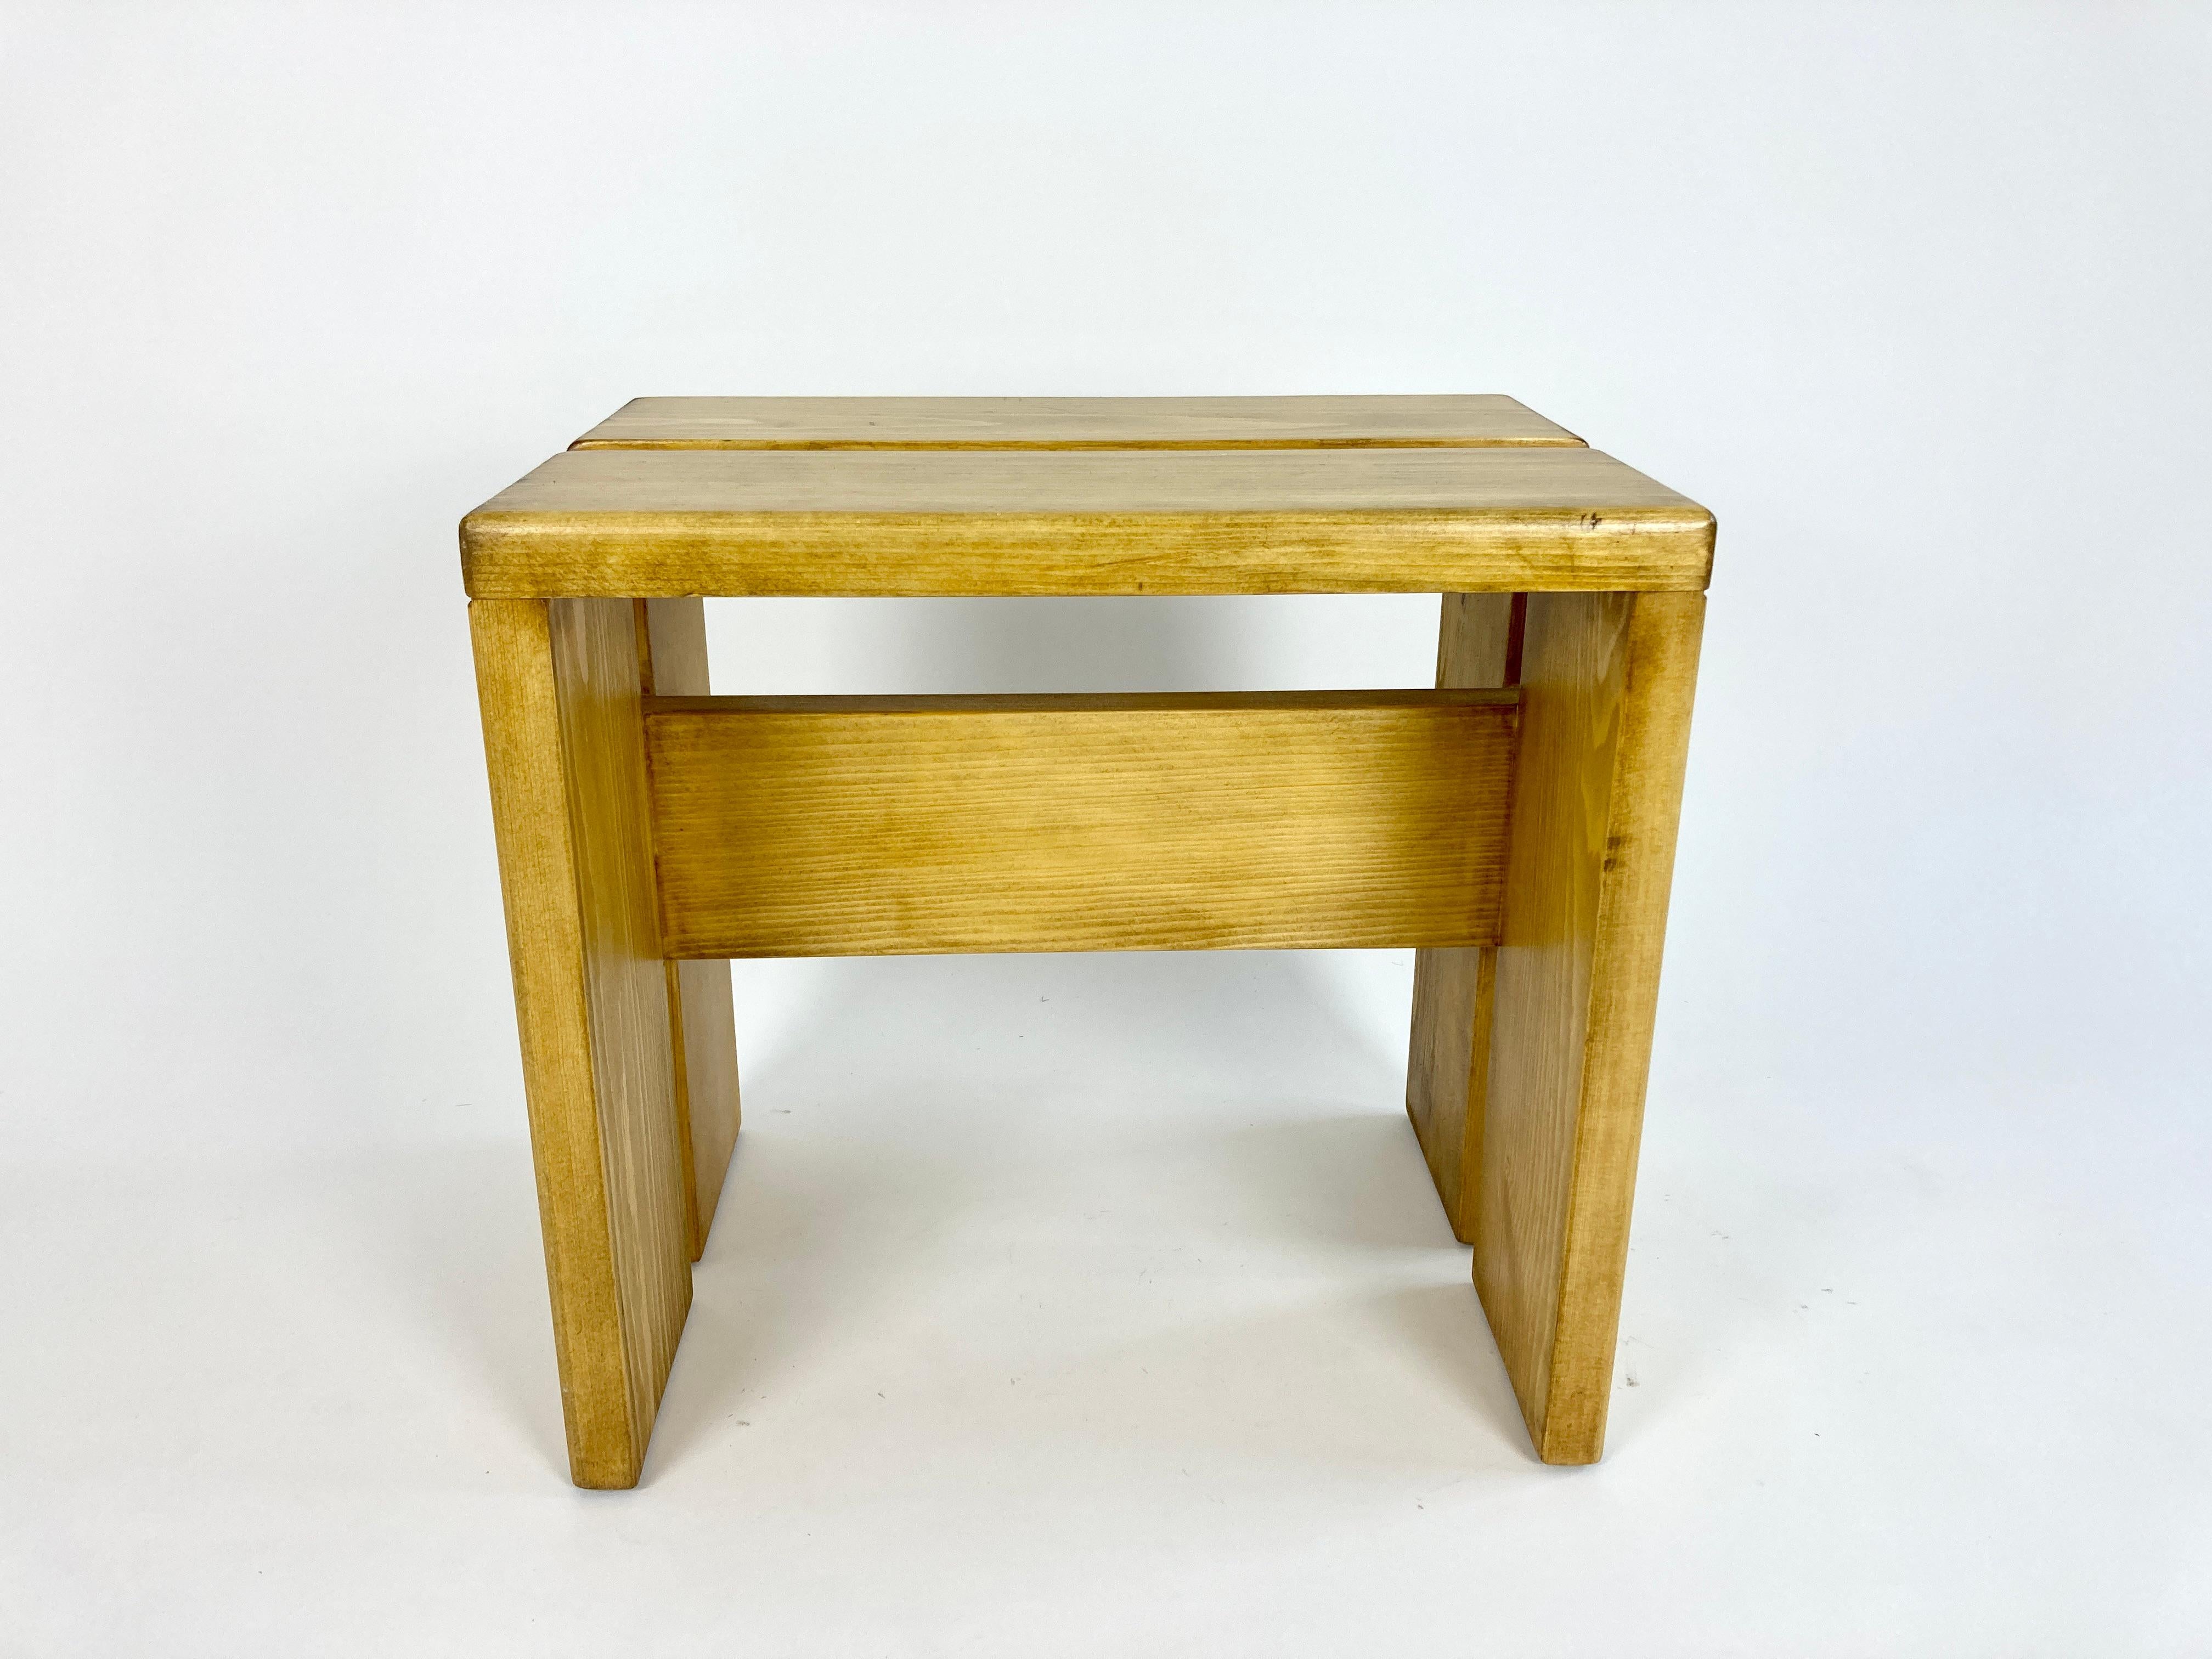 French Stool / Side Table / Small Bench from Les Arcs, France. Charlotte Perriand